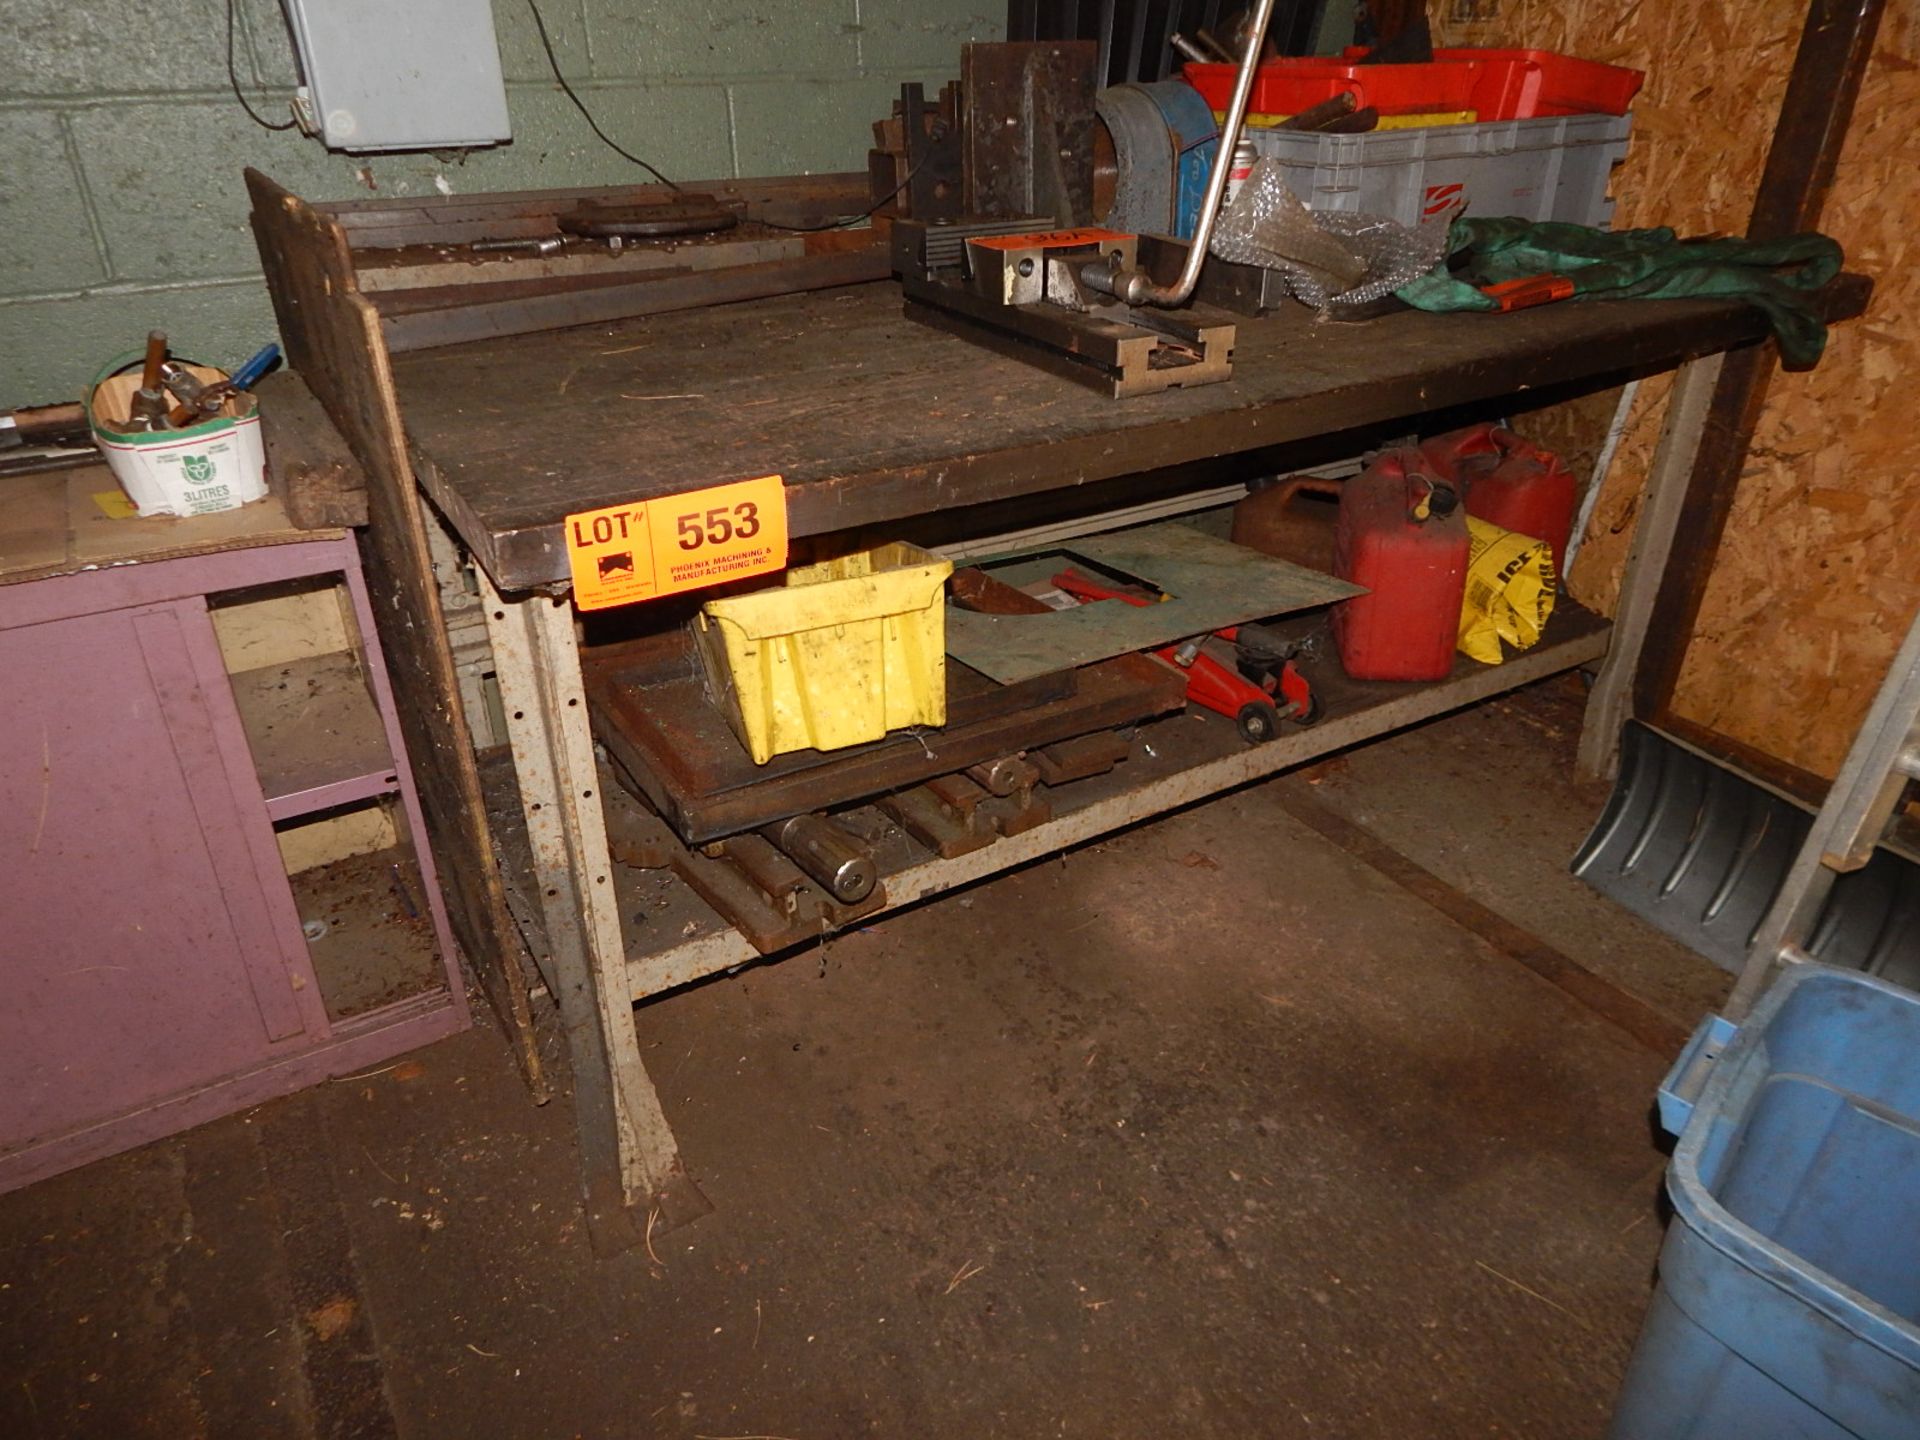 LOT/ WORK BENCH WITH REMAINING CONTENTS - INCLUDING (2) MACHINE VISES, CAR JACK, GAS CANS, SHOP